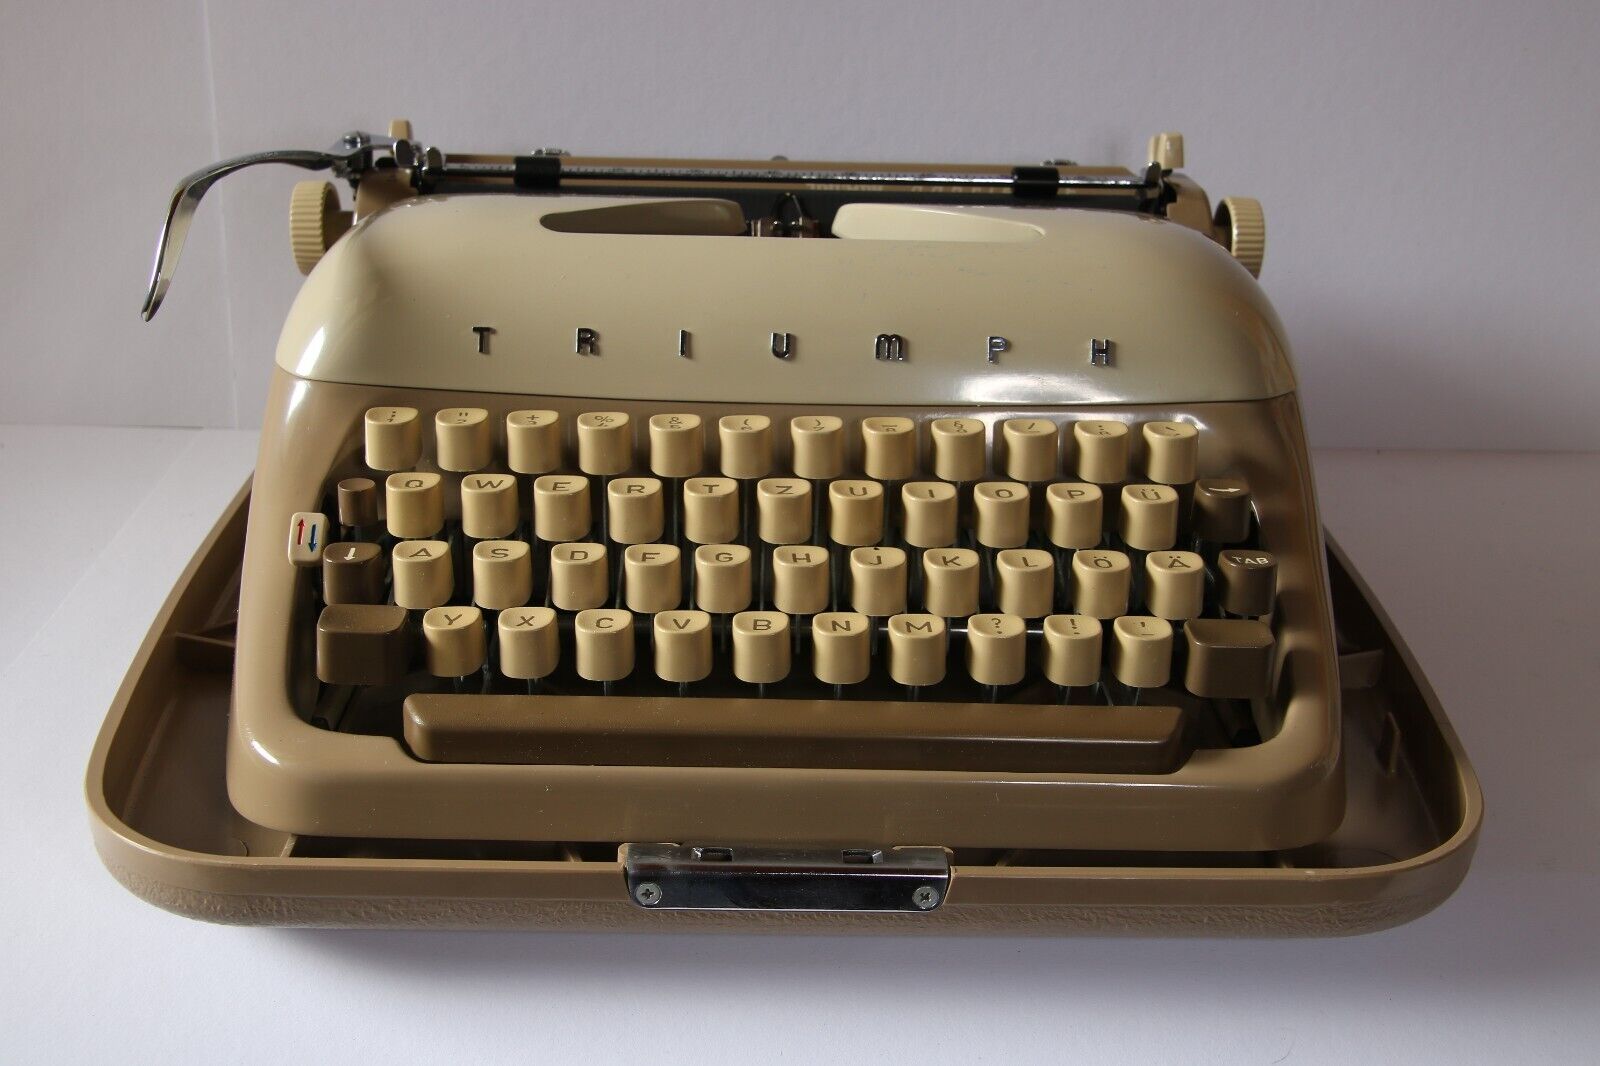 Triumph Gabriele E -  1960\'s typewriter in excellent condition serviced-tested